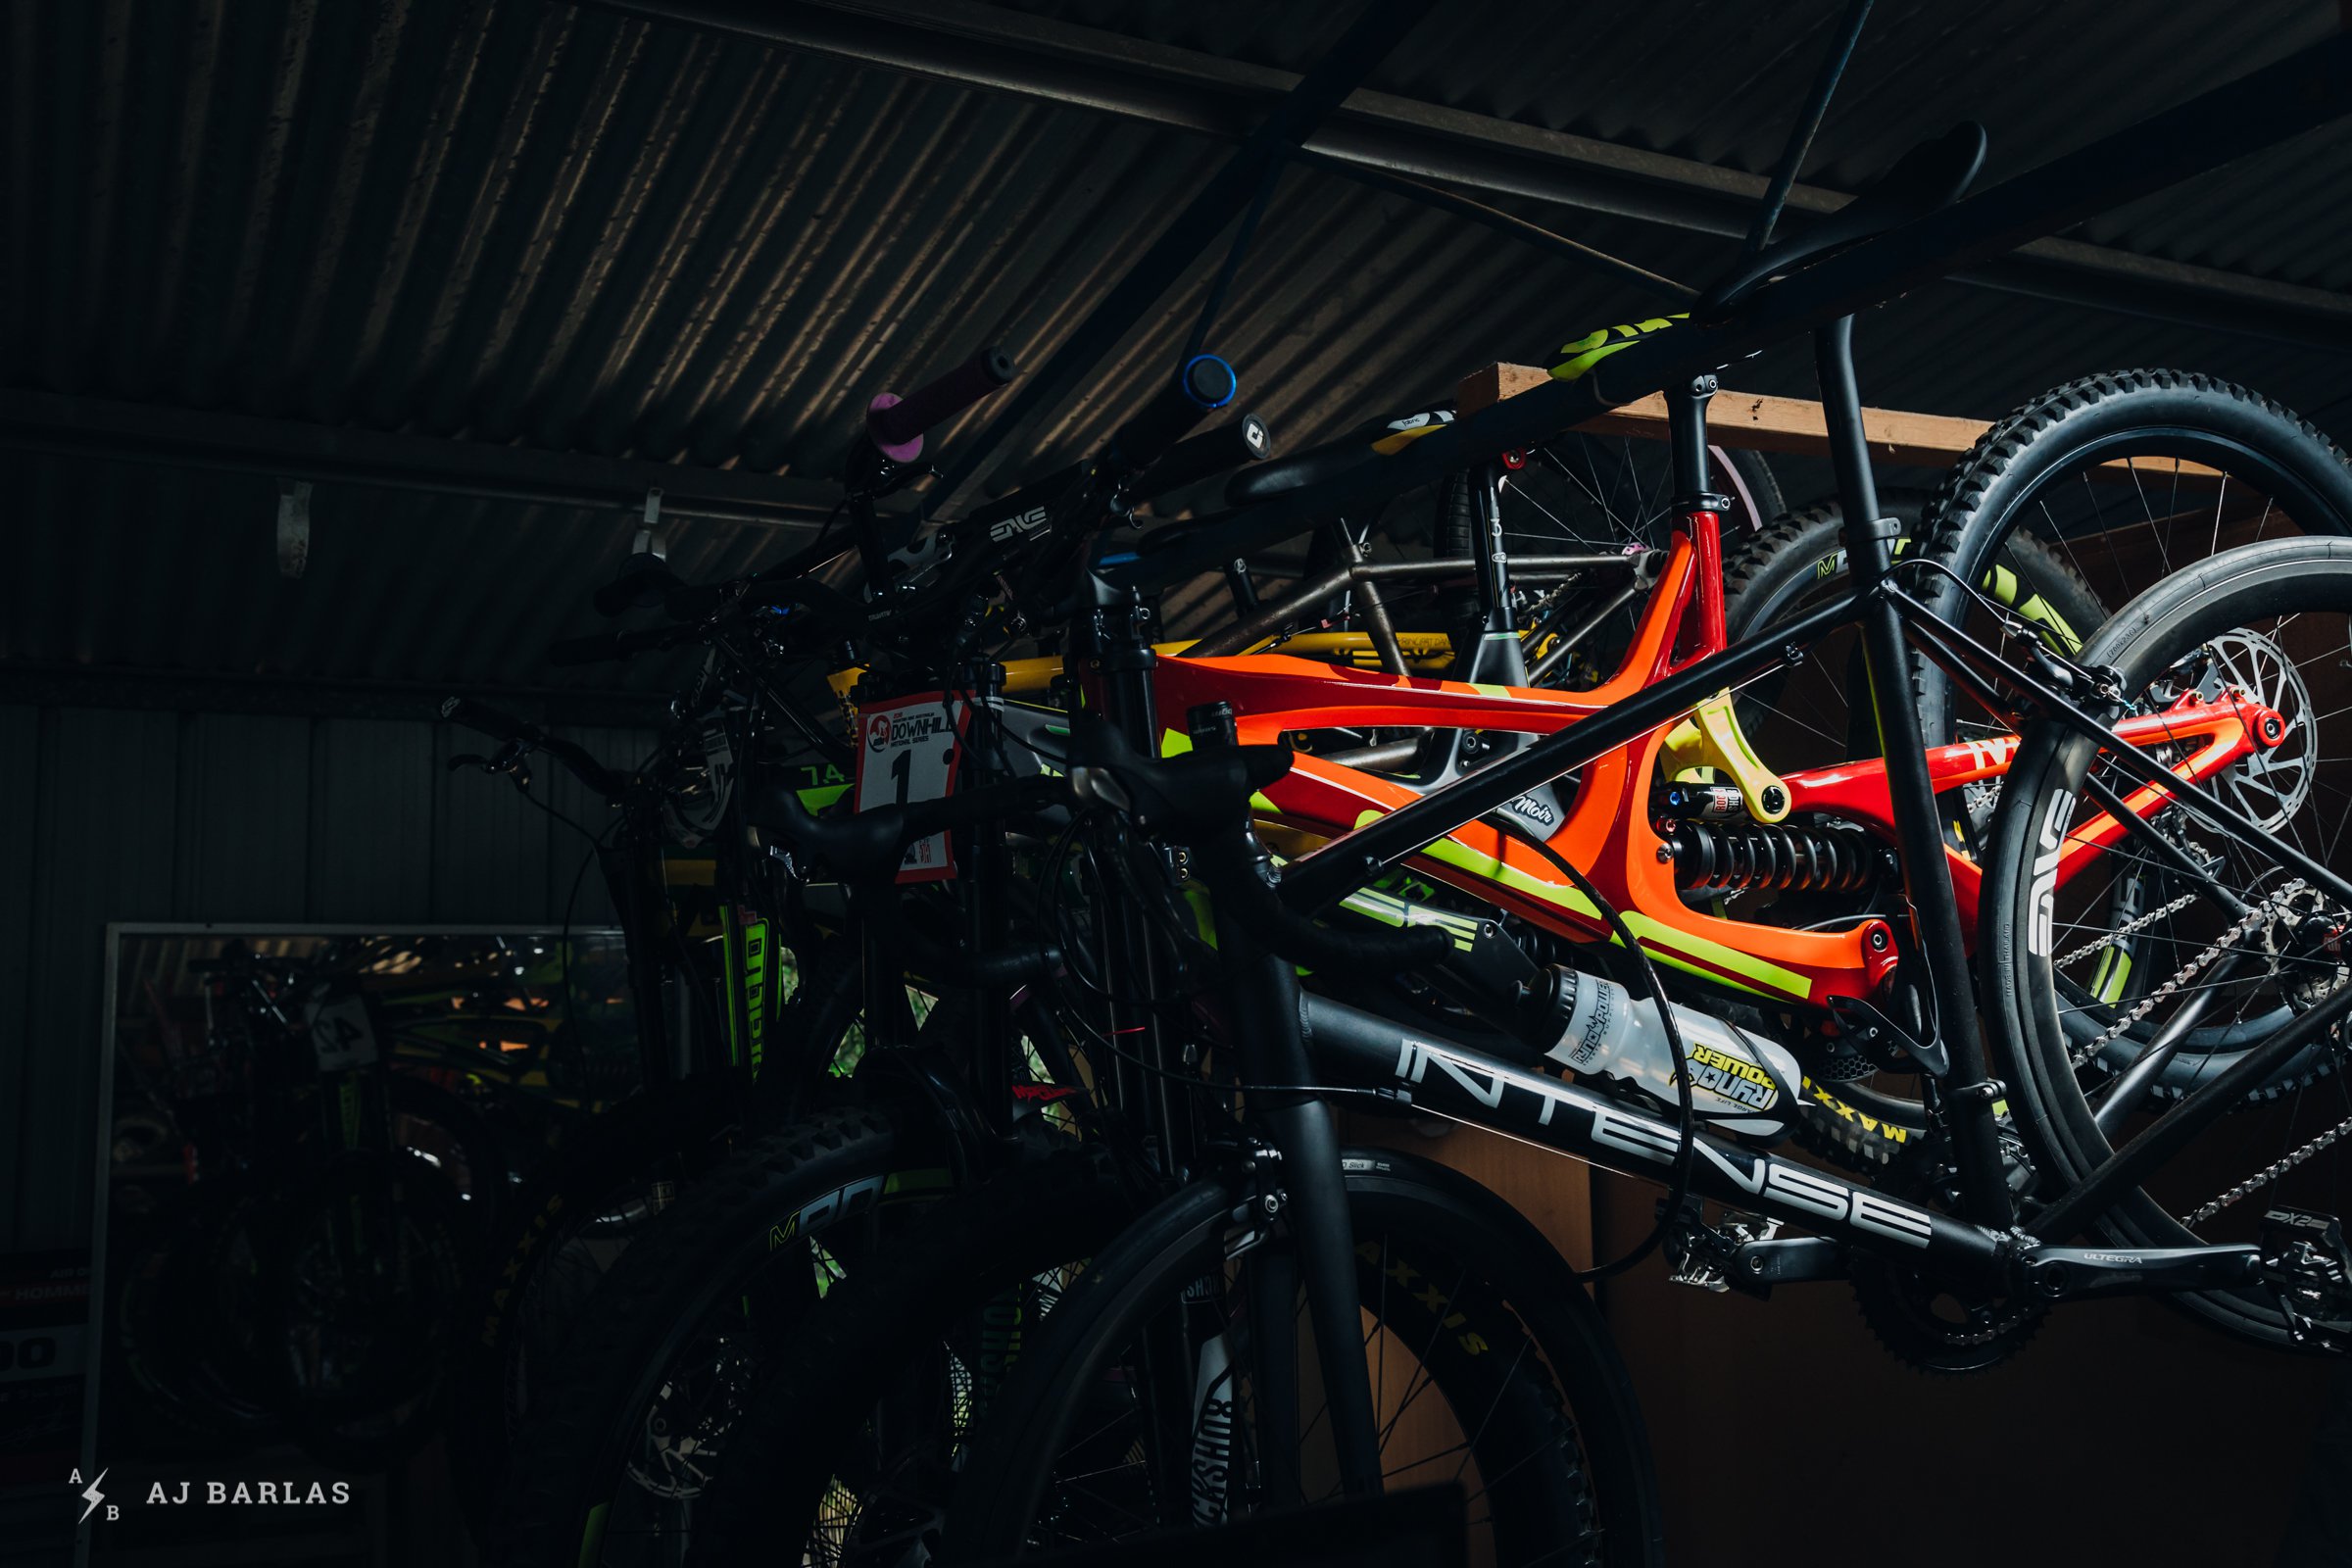 Jack Moir's collection of memorable bikes